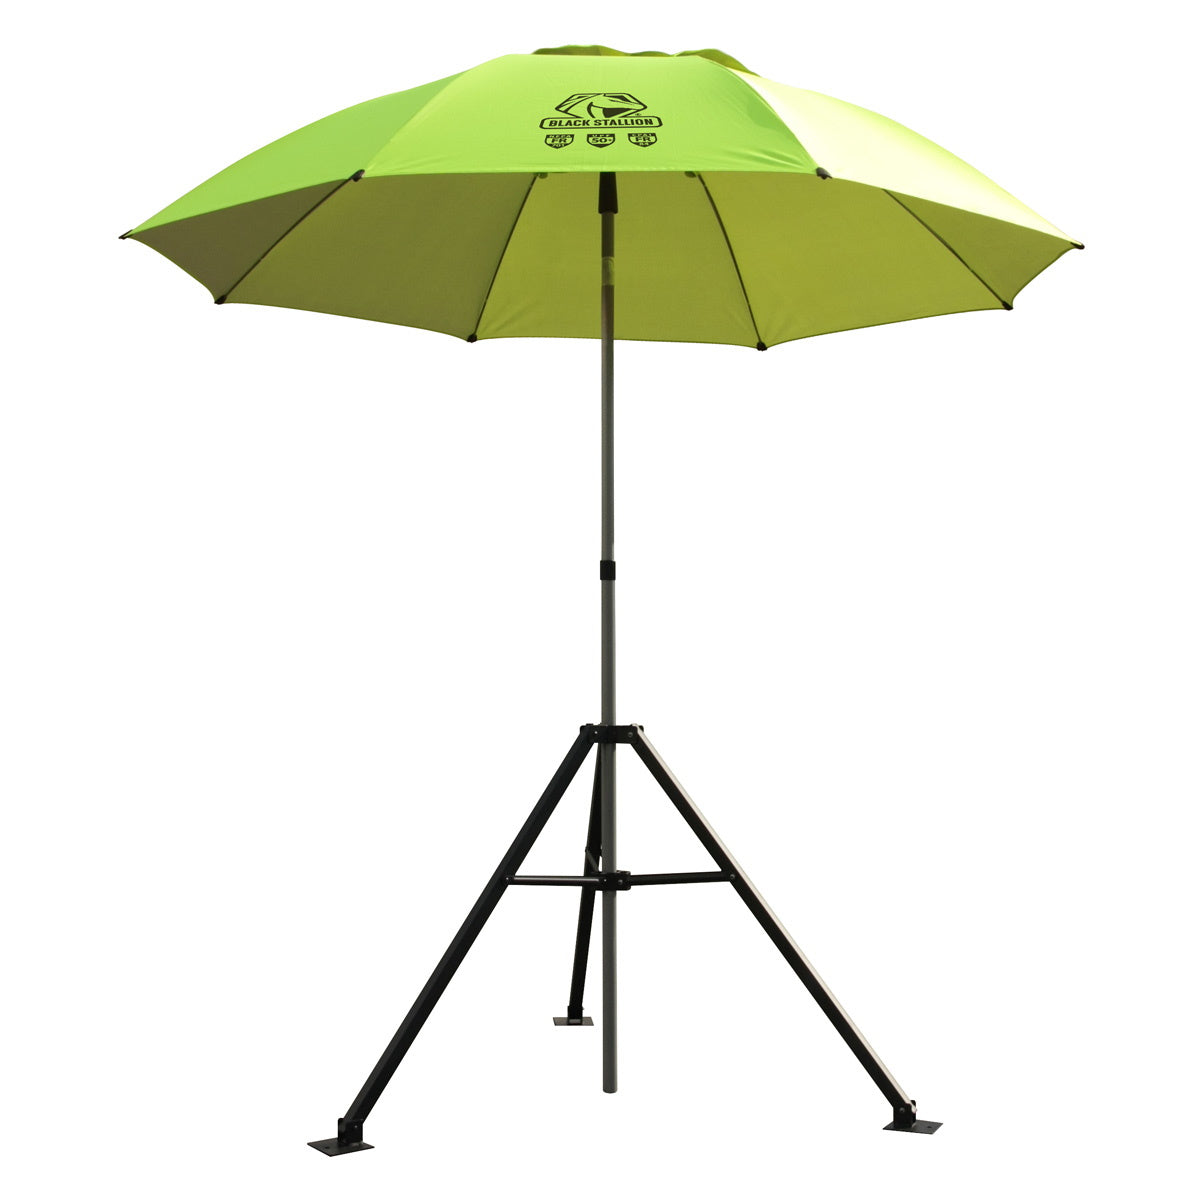 Revco Black Stallion Yellow FR Industrial Umbrella with Stand (UB150)